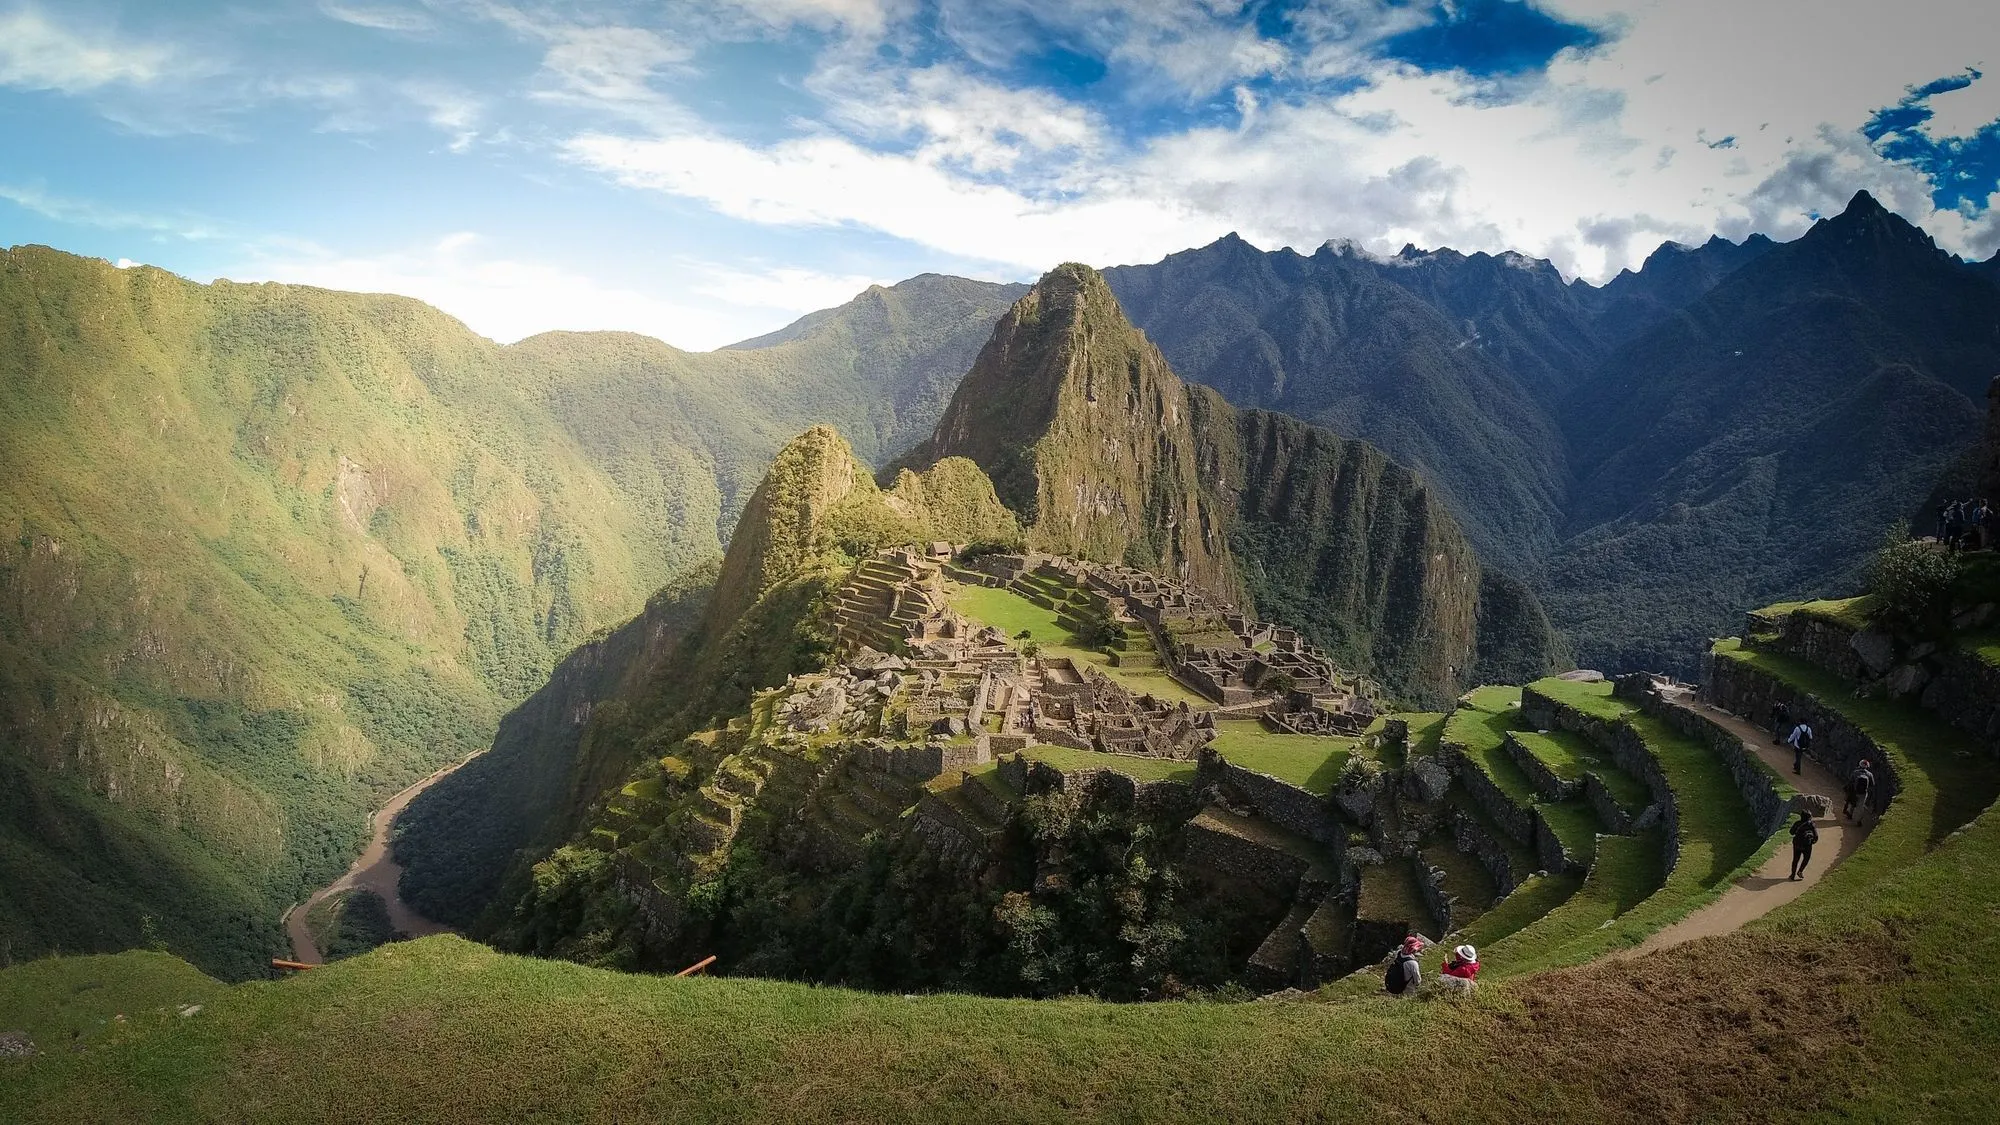 Machu Picchu's Temple of the Sun was used as an astronomical observatory by the Incas.